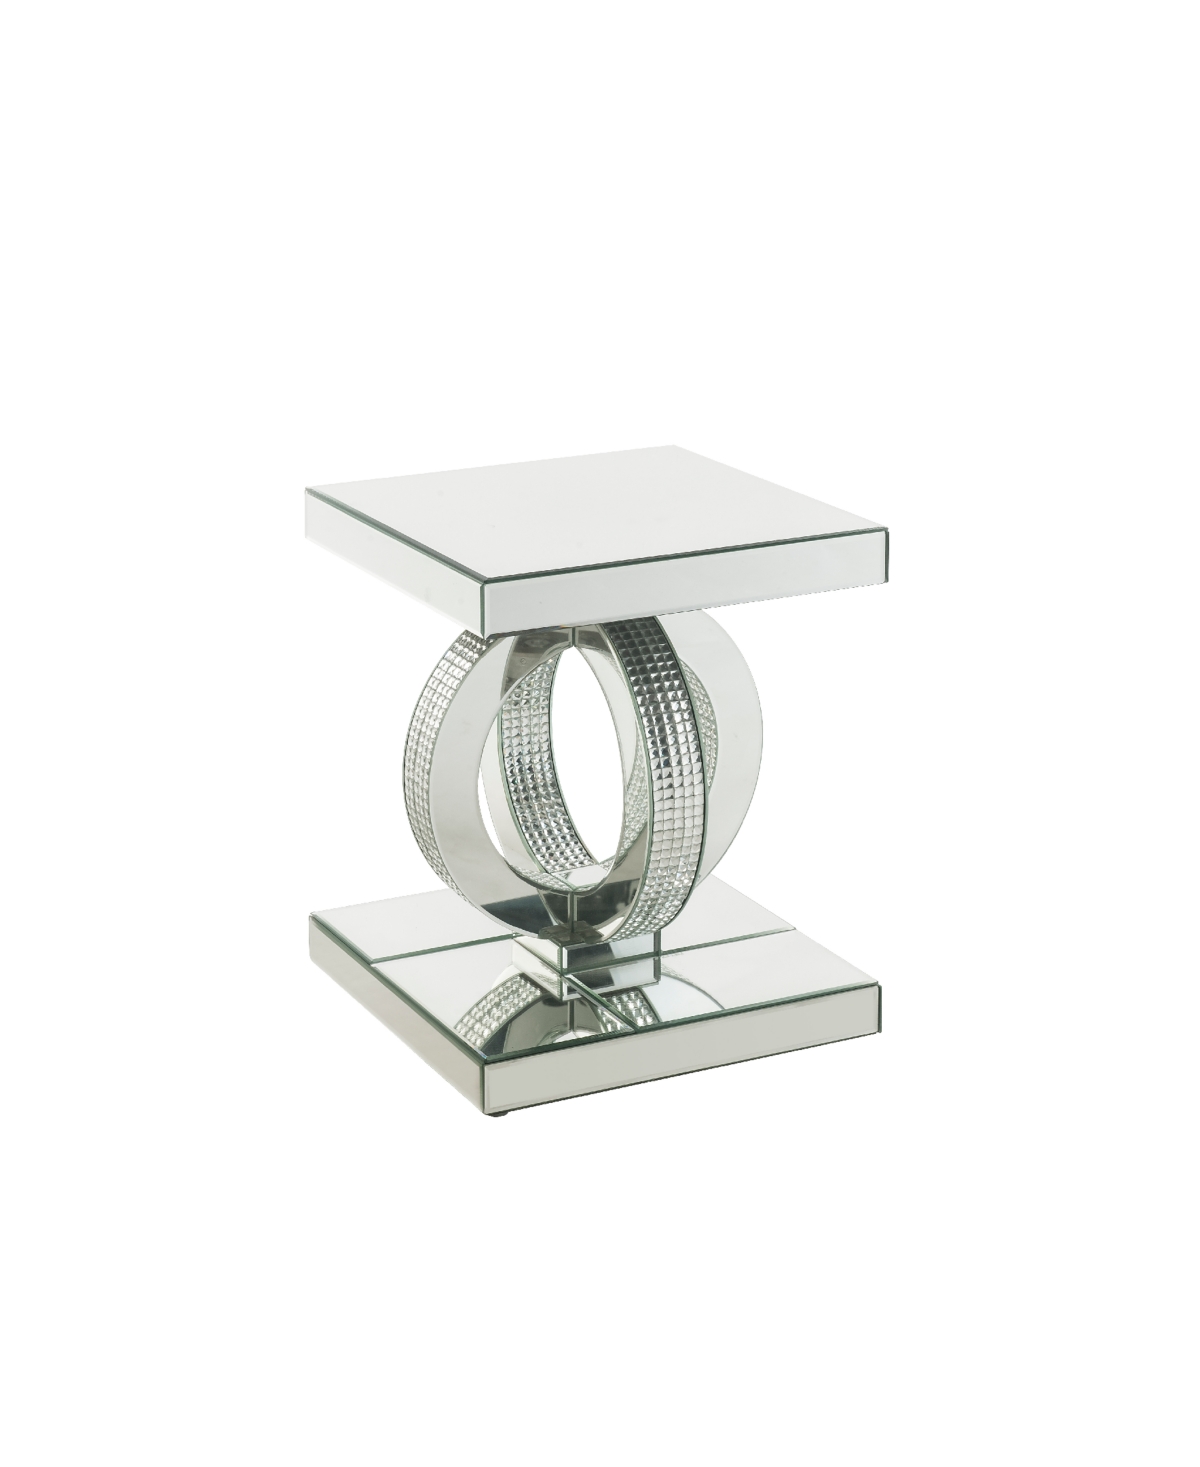 Acme Furniture Ornat End Table In Mirrored And Faux Diamonds